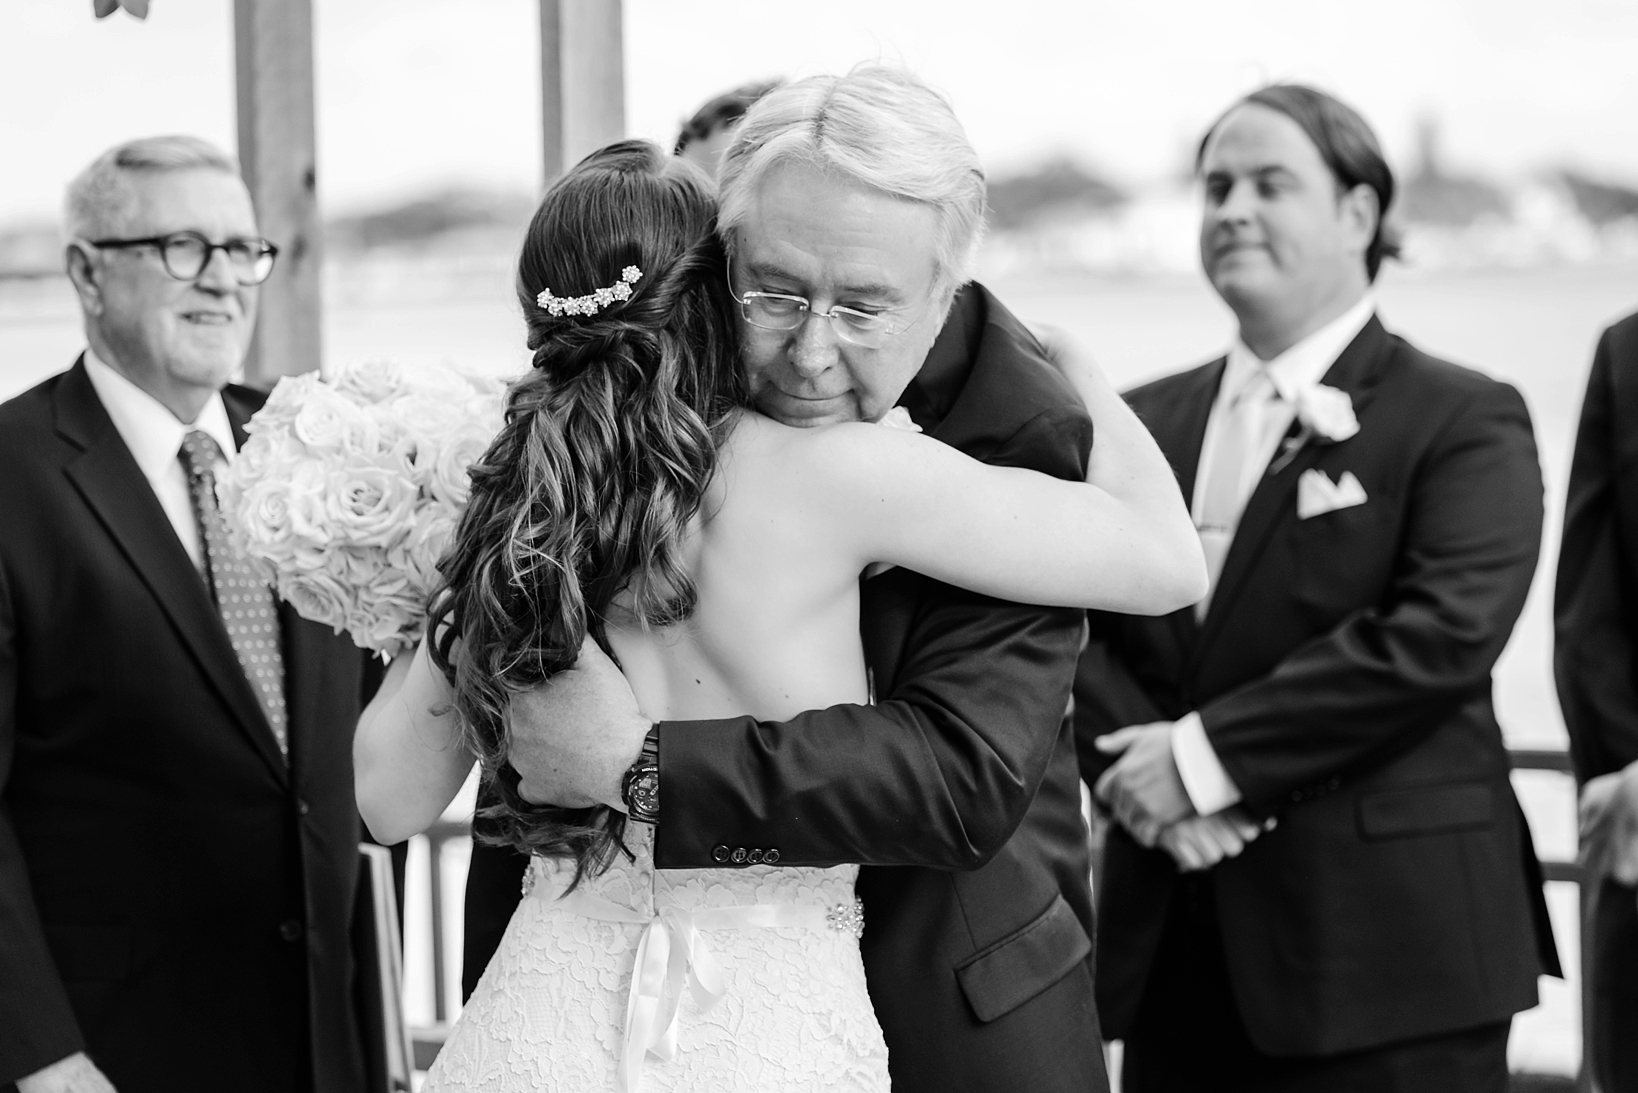 Father and Daughter embrace as he gives her away on her wedding day